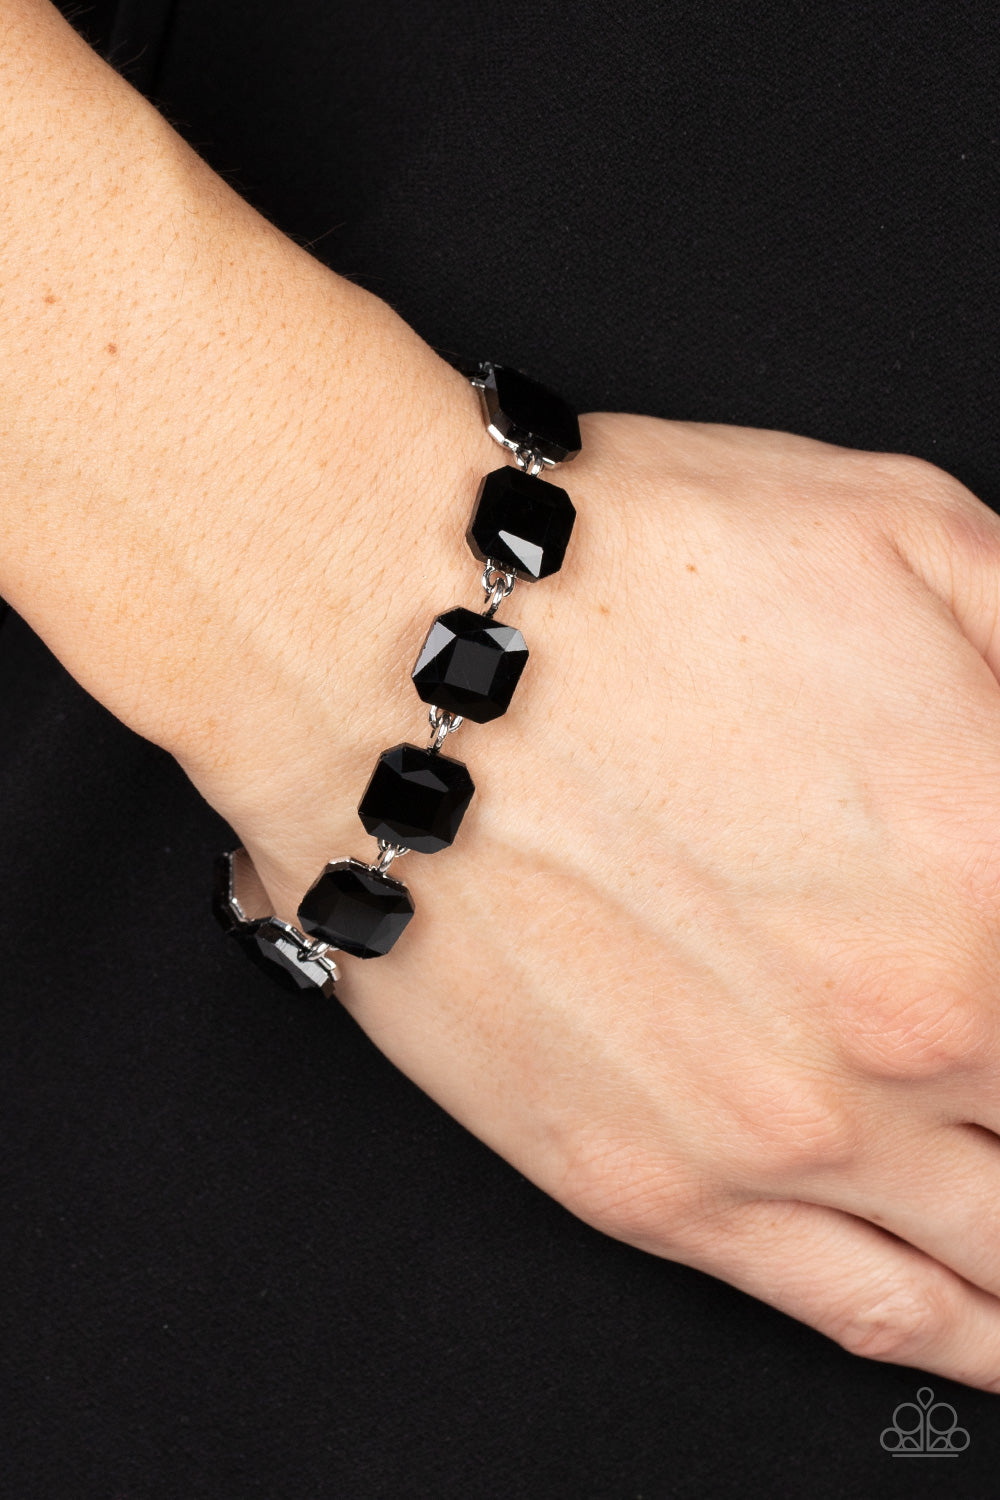 Mind-Blowing Bling - Black Rhinestone and Silver Bracelet  - Paparazzi Accessories - Featuring radiant cuts, glittery black rhinestones sit atop silver frames as they delicately link around the wrist for a mind-blowing brilliance. Features an adjustable clasp closure.